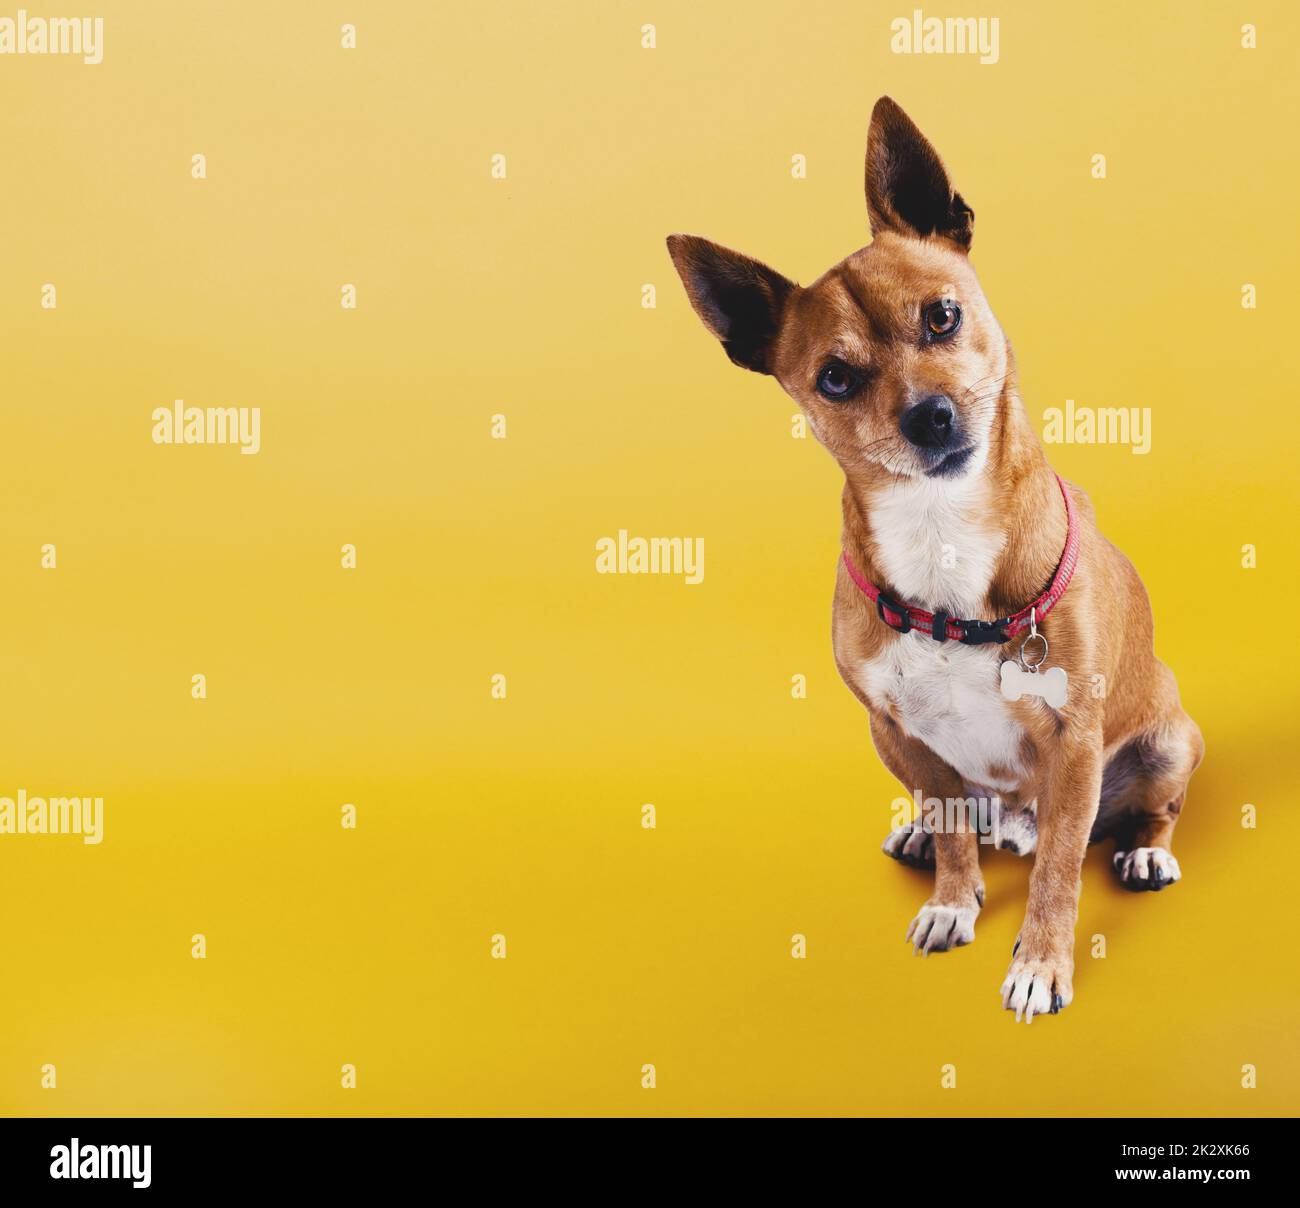 Funny small dog with uncertainty face on yellow background Stock Photo